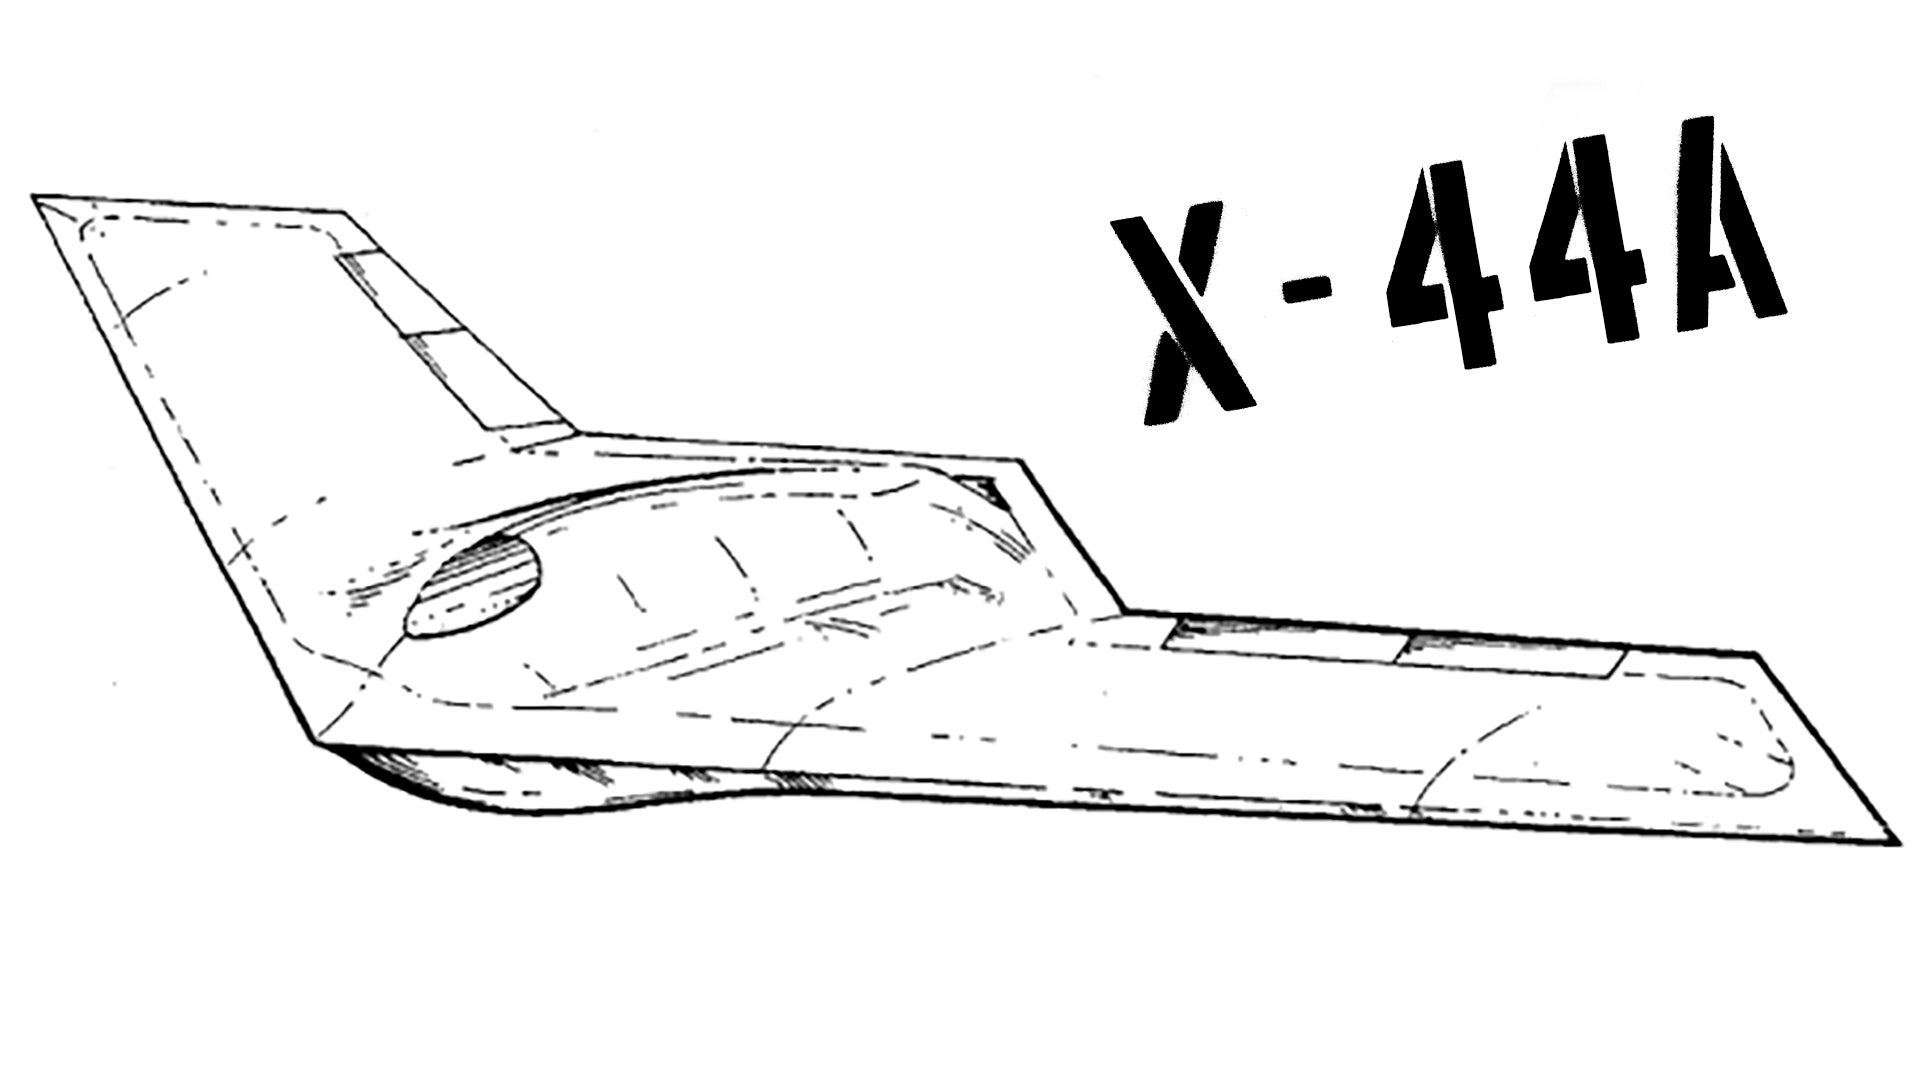 Exclusive: Lockheed Skunk Works’ X-44A Flying-Wing Drone Revealed